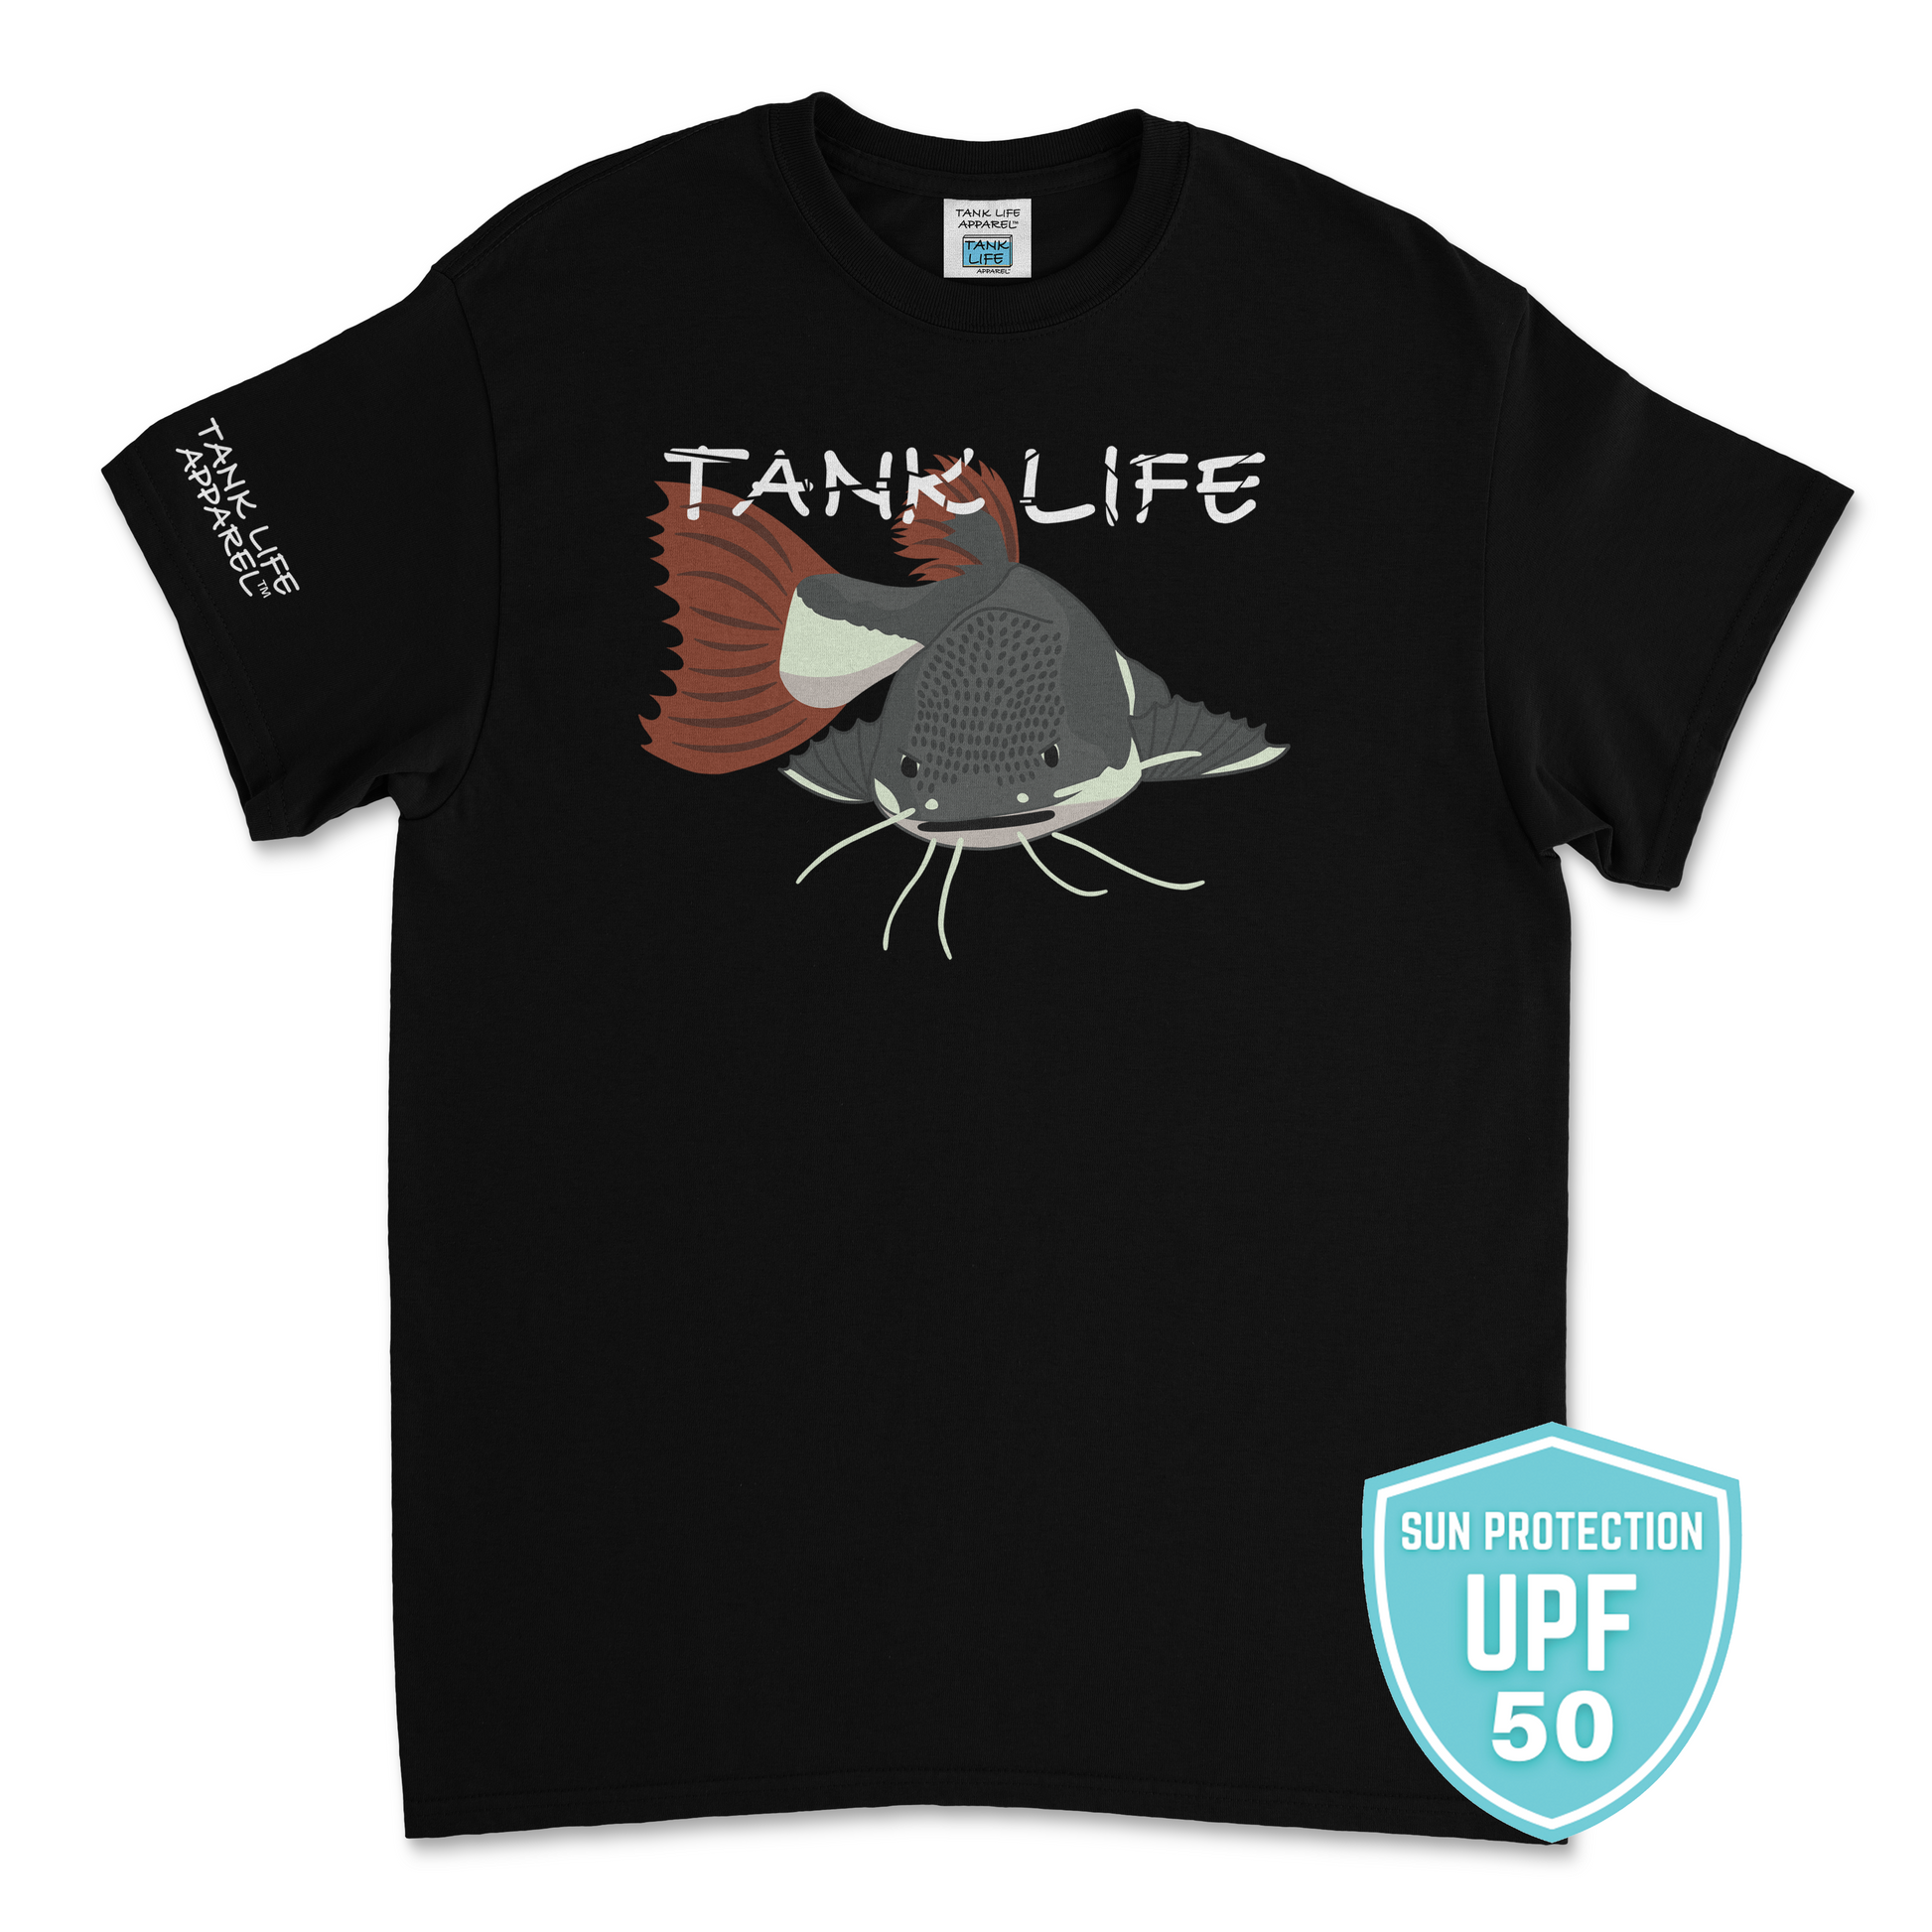 The Tank Life Apparel red tail catfish design on an athletic dri fit performance shirt. Gray catfish with white belly and whiskers and red tail. 